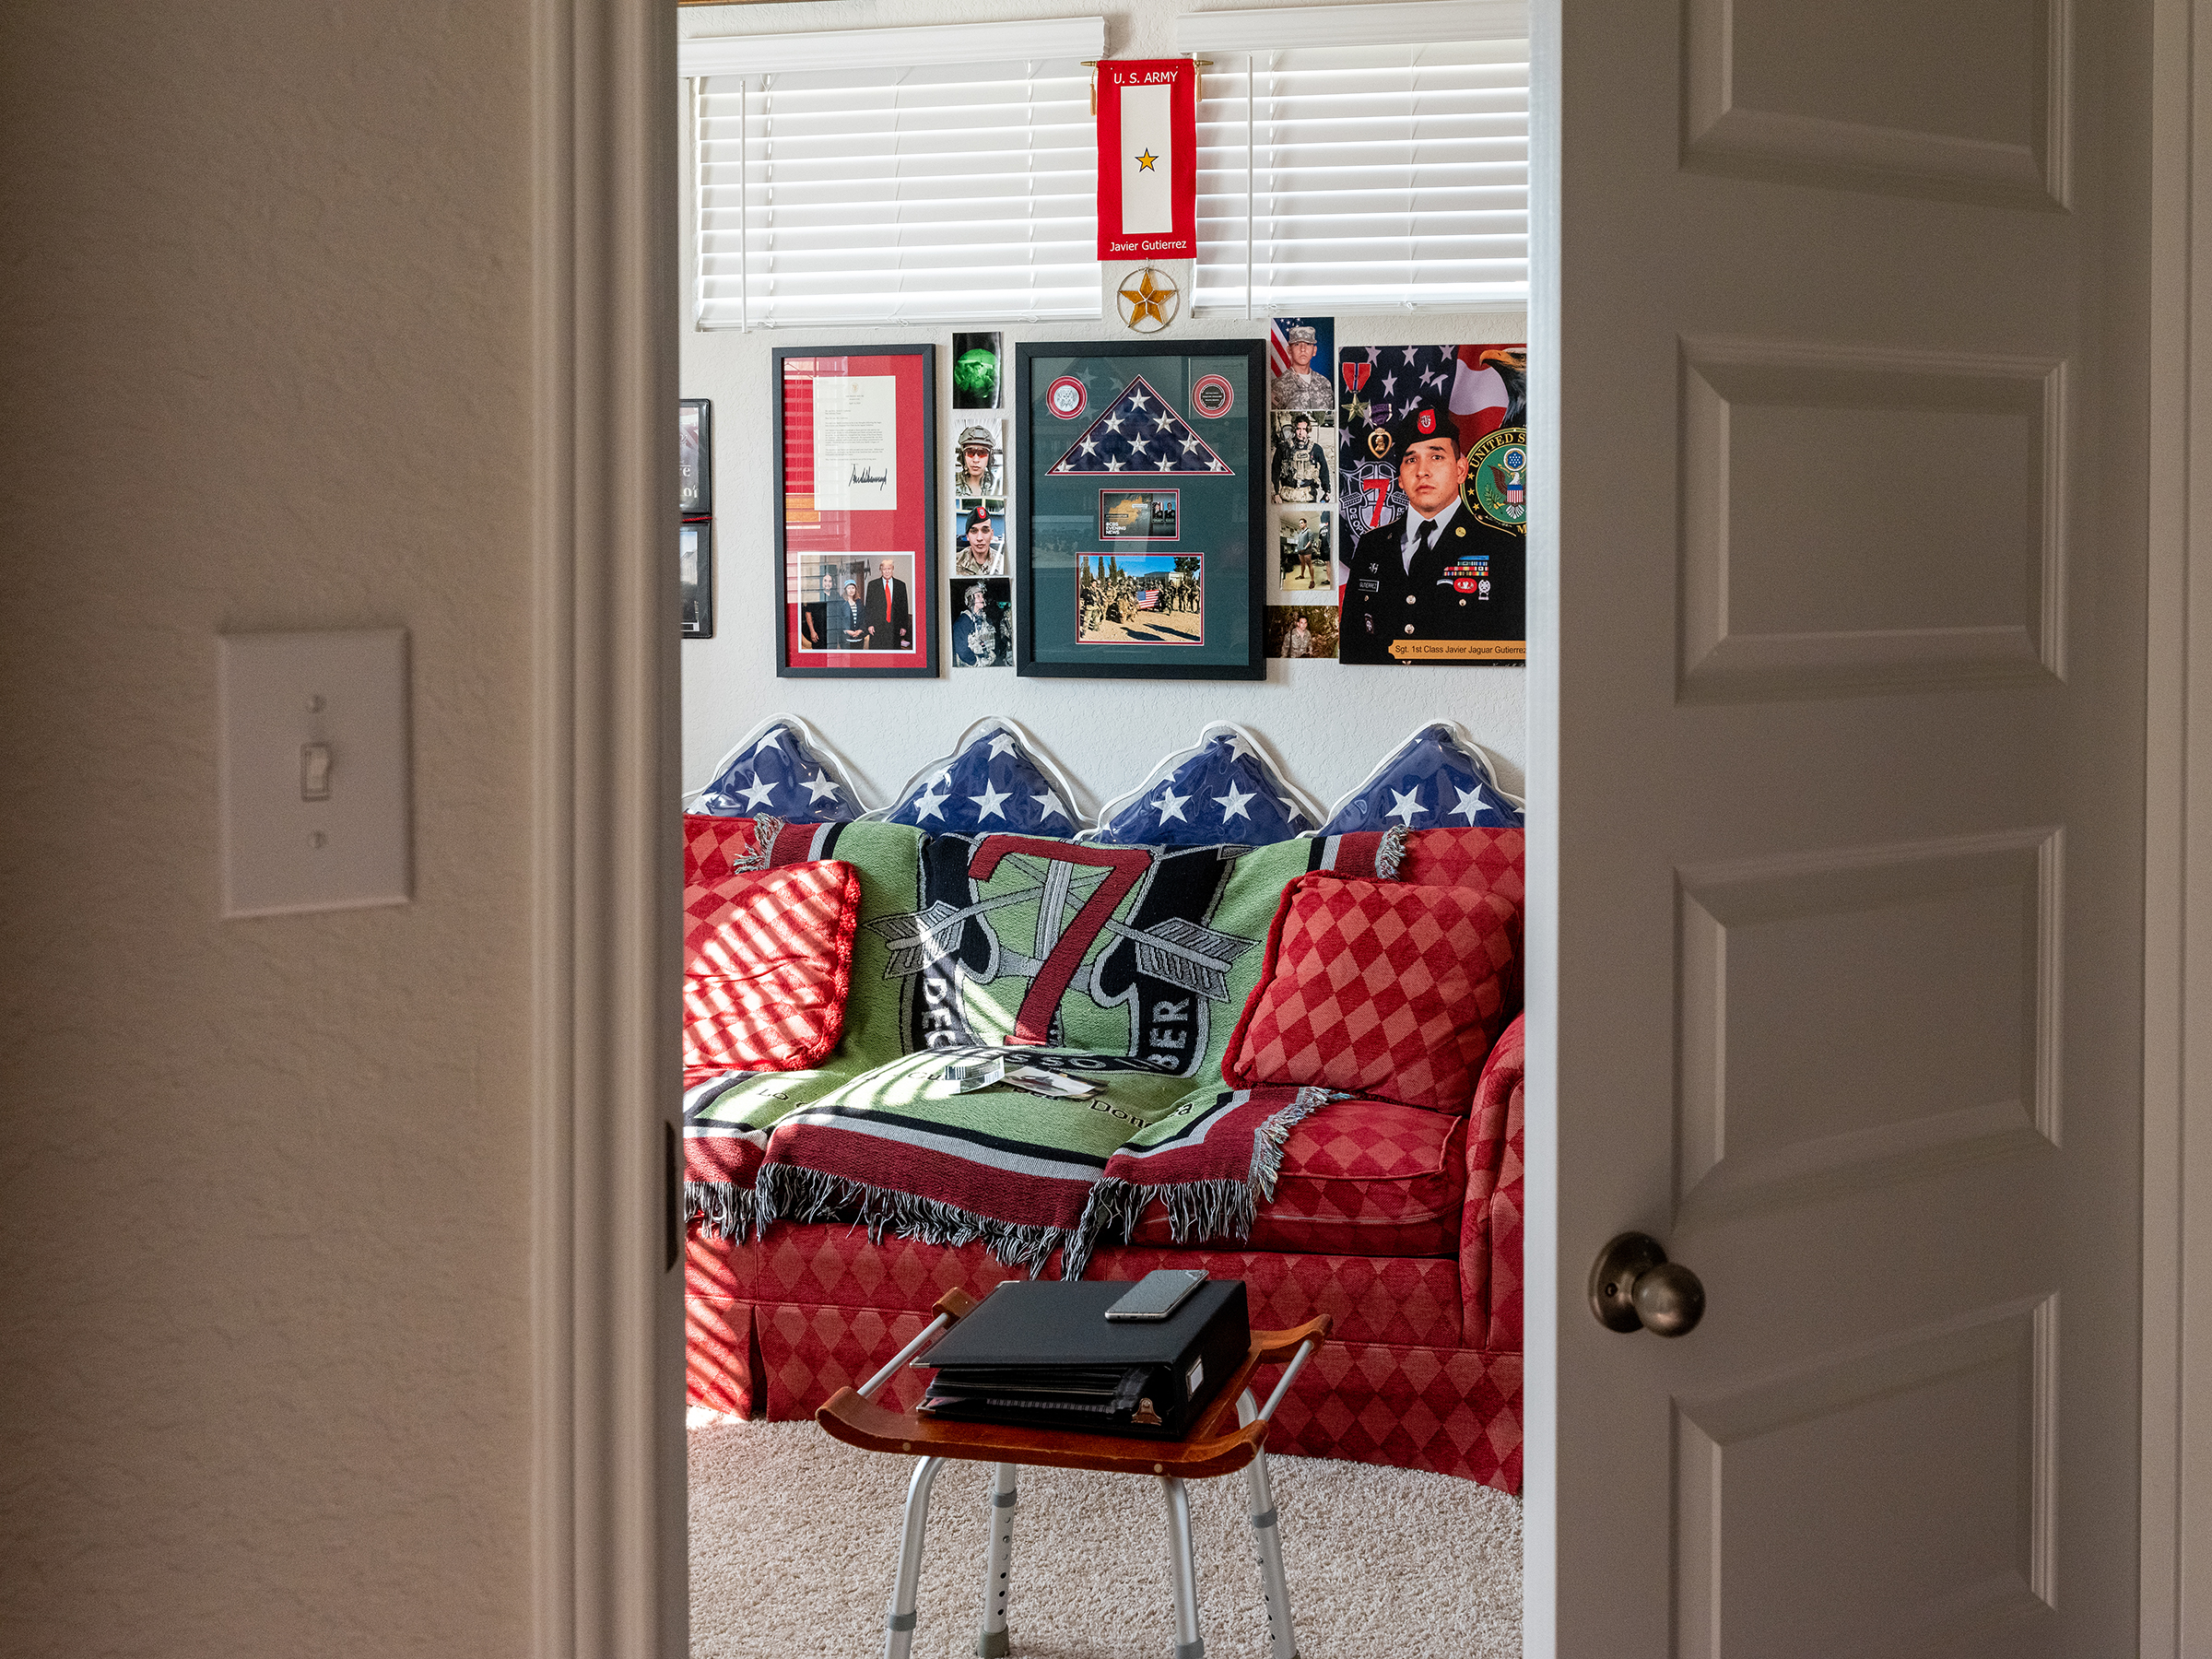 The sunroom in the Gutierrez family’s two-story brick home in San Antonio is decorated with <a href="https://time.com/6094290/grieving-american-soldier-killed-in-afghanistan/">remembrances of their fallen son</a>. (Peter van Agtmael—Magnum Photos for TIME)